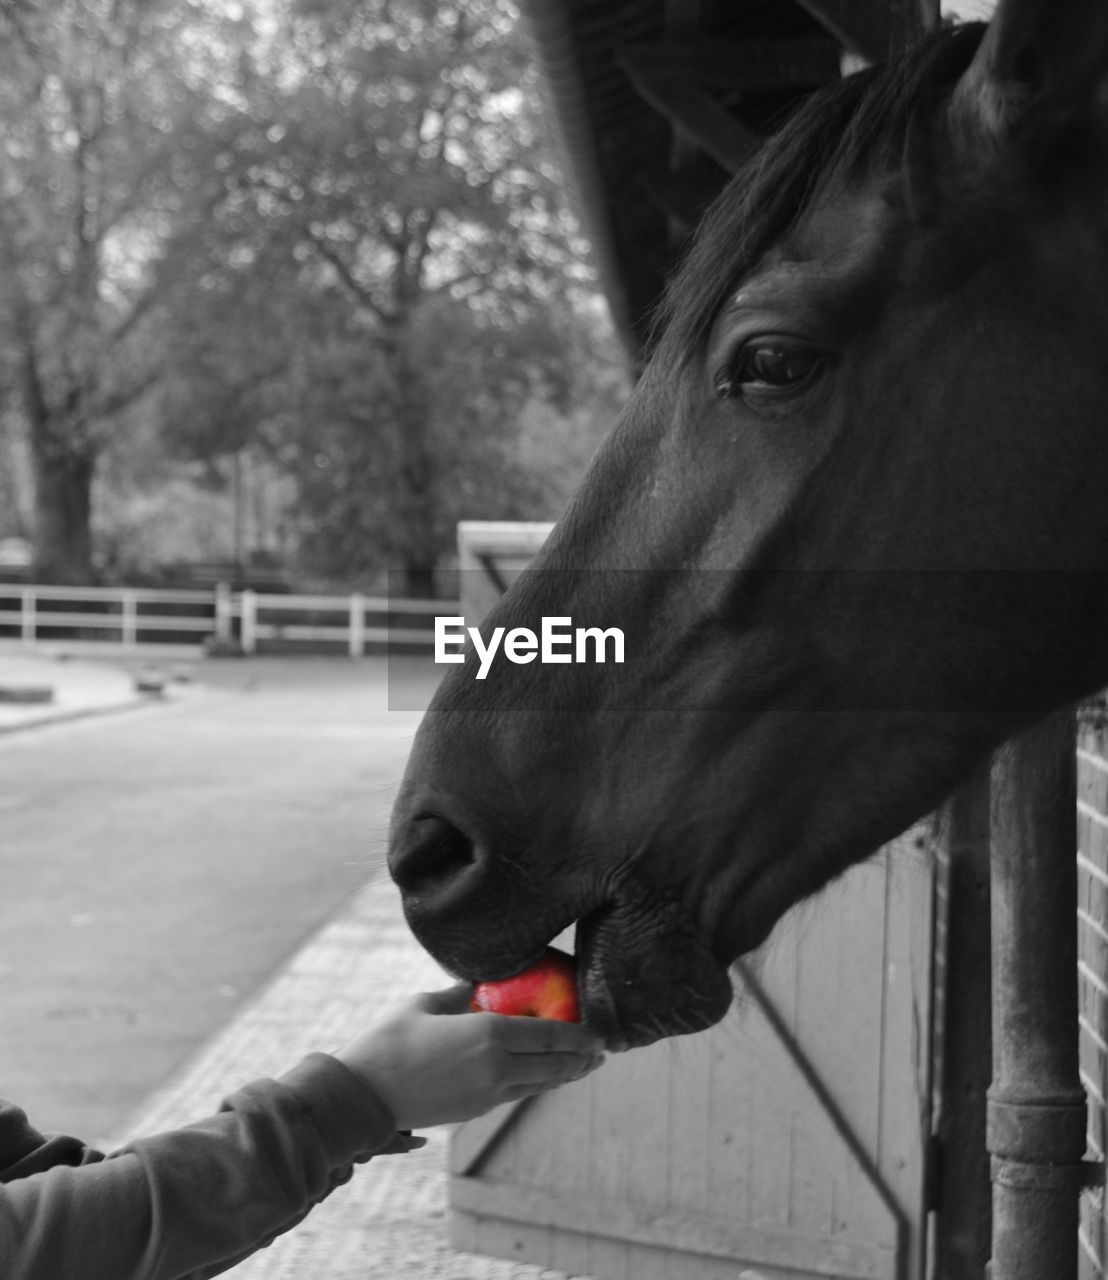 Person feeding horse with apple